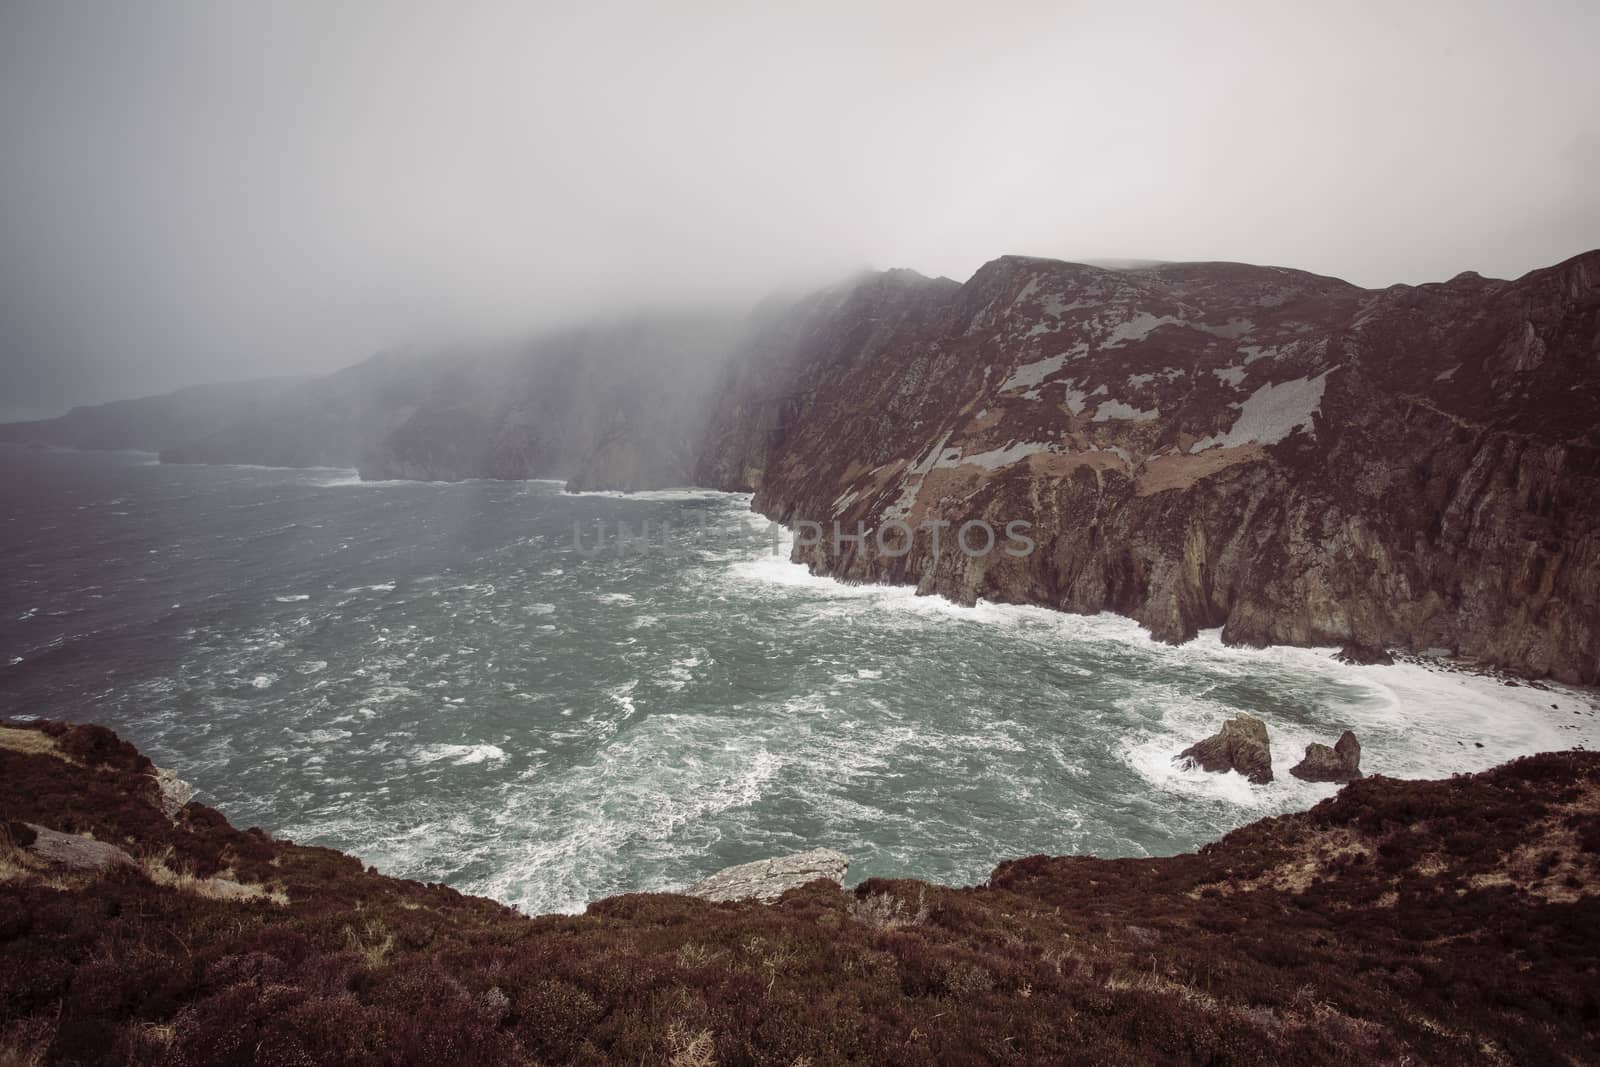 Rain approaching the majestic Slieve League Cliffs in Co. Donegal, Ireland